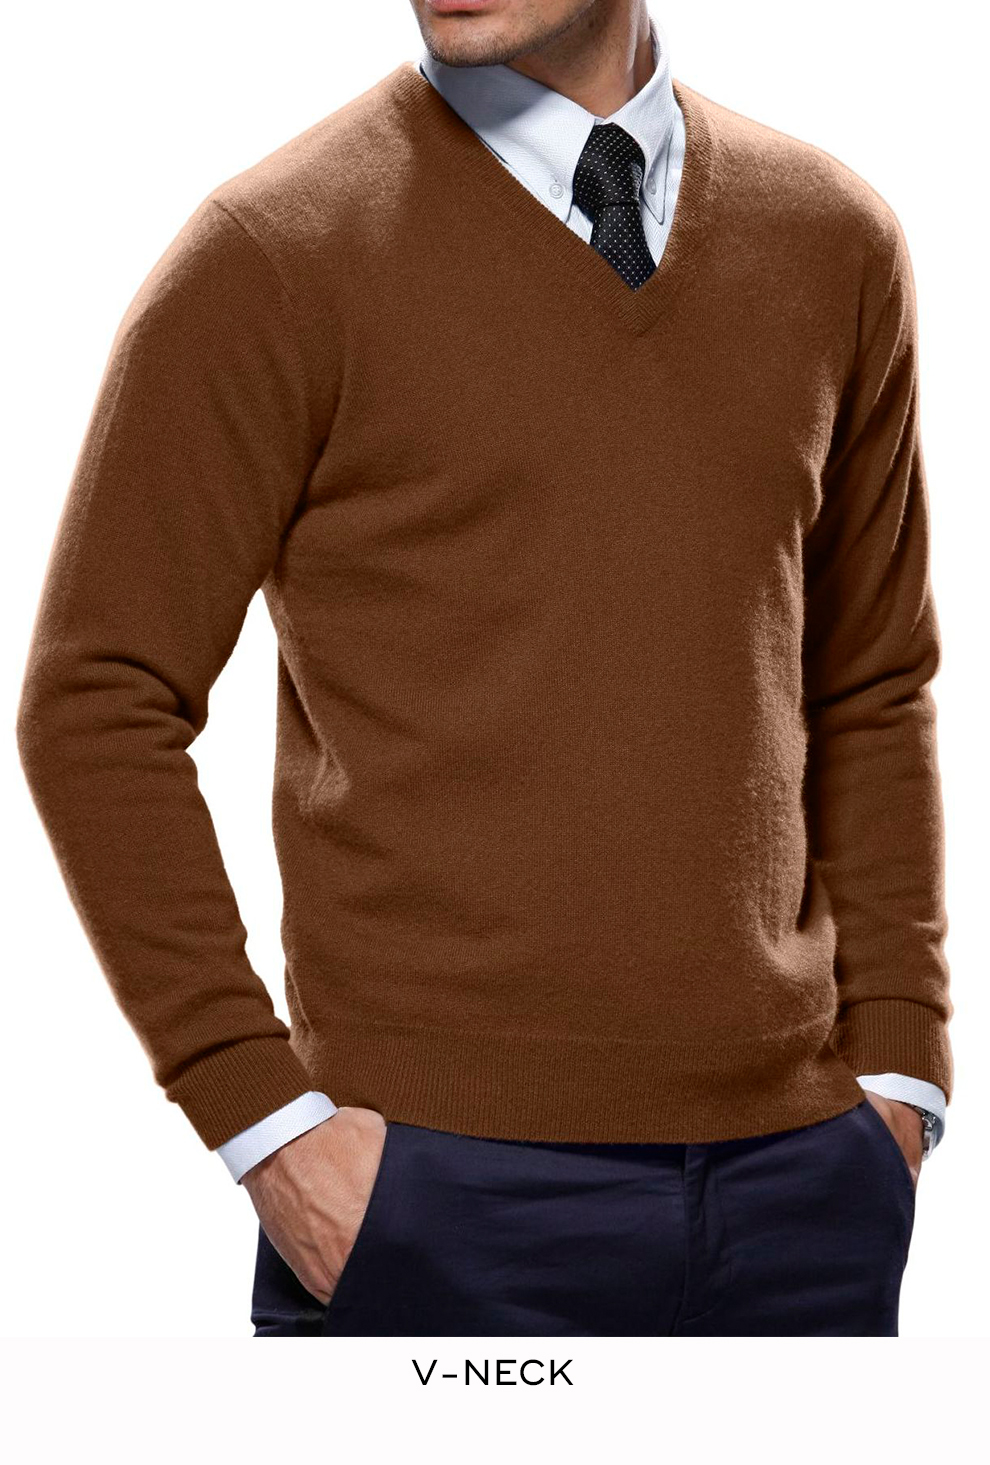 Coolred-Men Luxury Fitted Contrast Color Round Neck Sweater Knitwear 